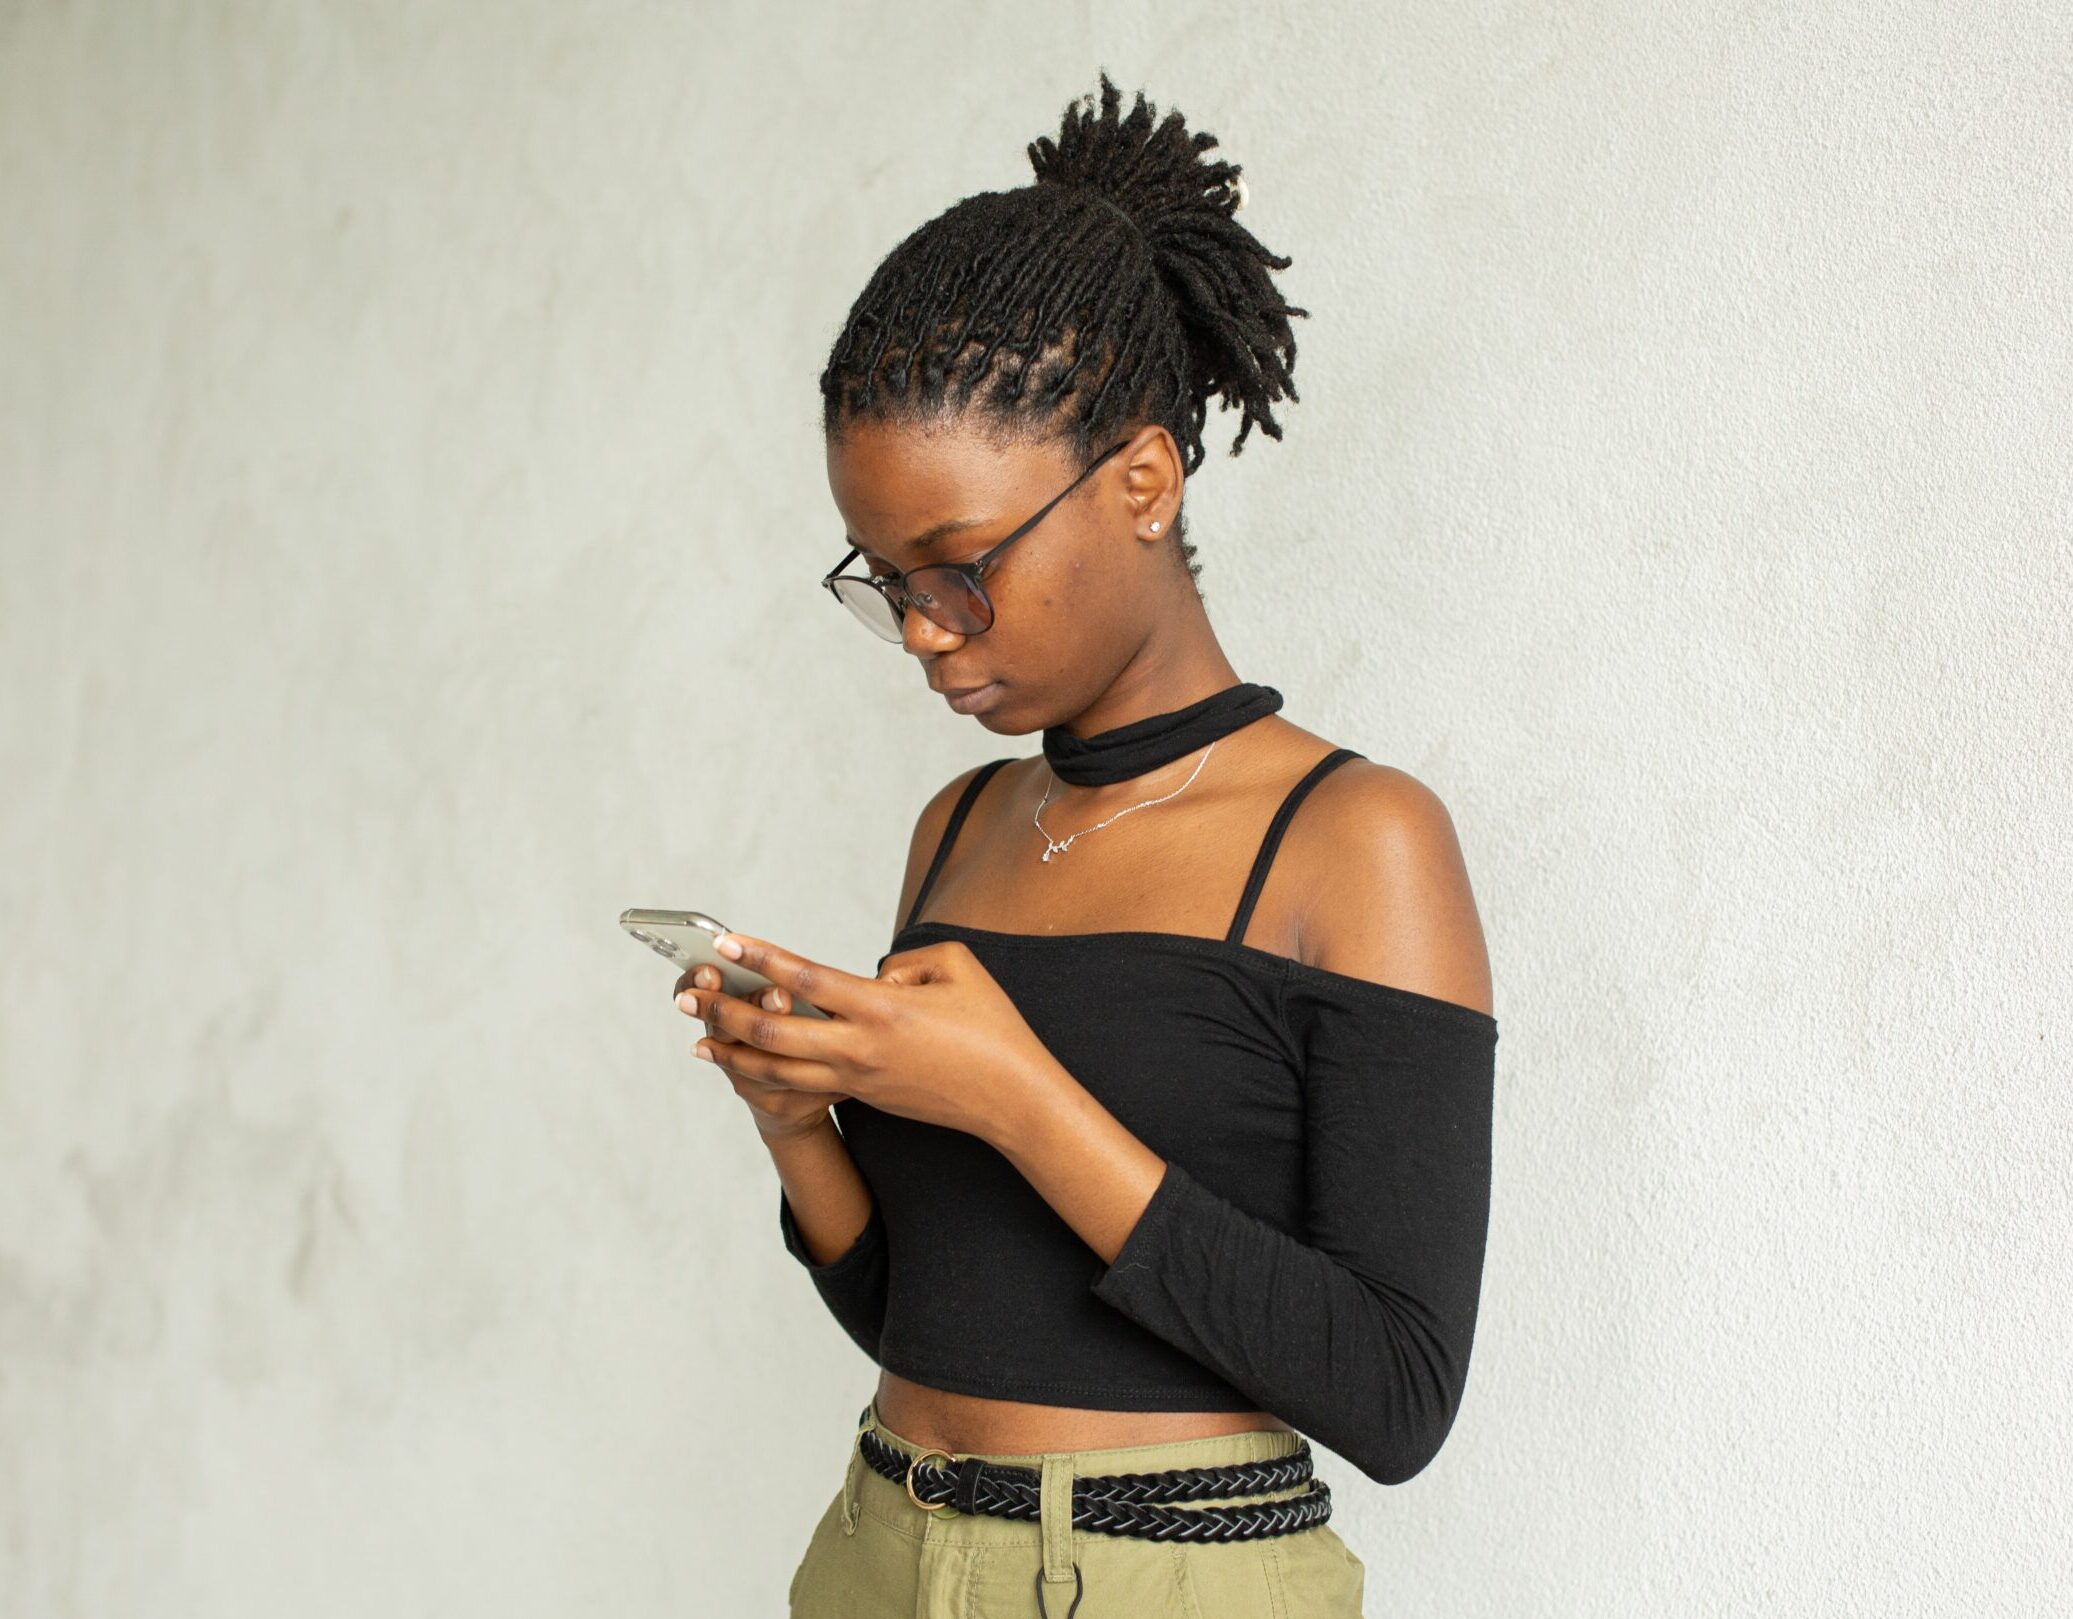 student with braided pony tail and glasses standing up looking at her phone with a serious look on her face